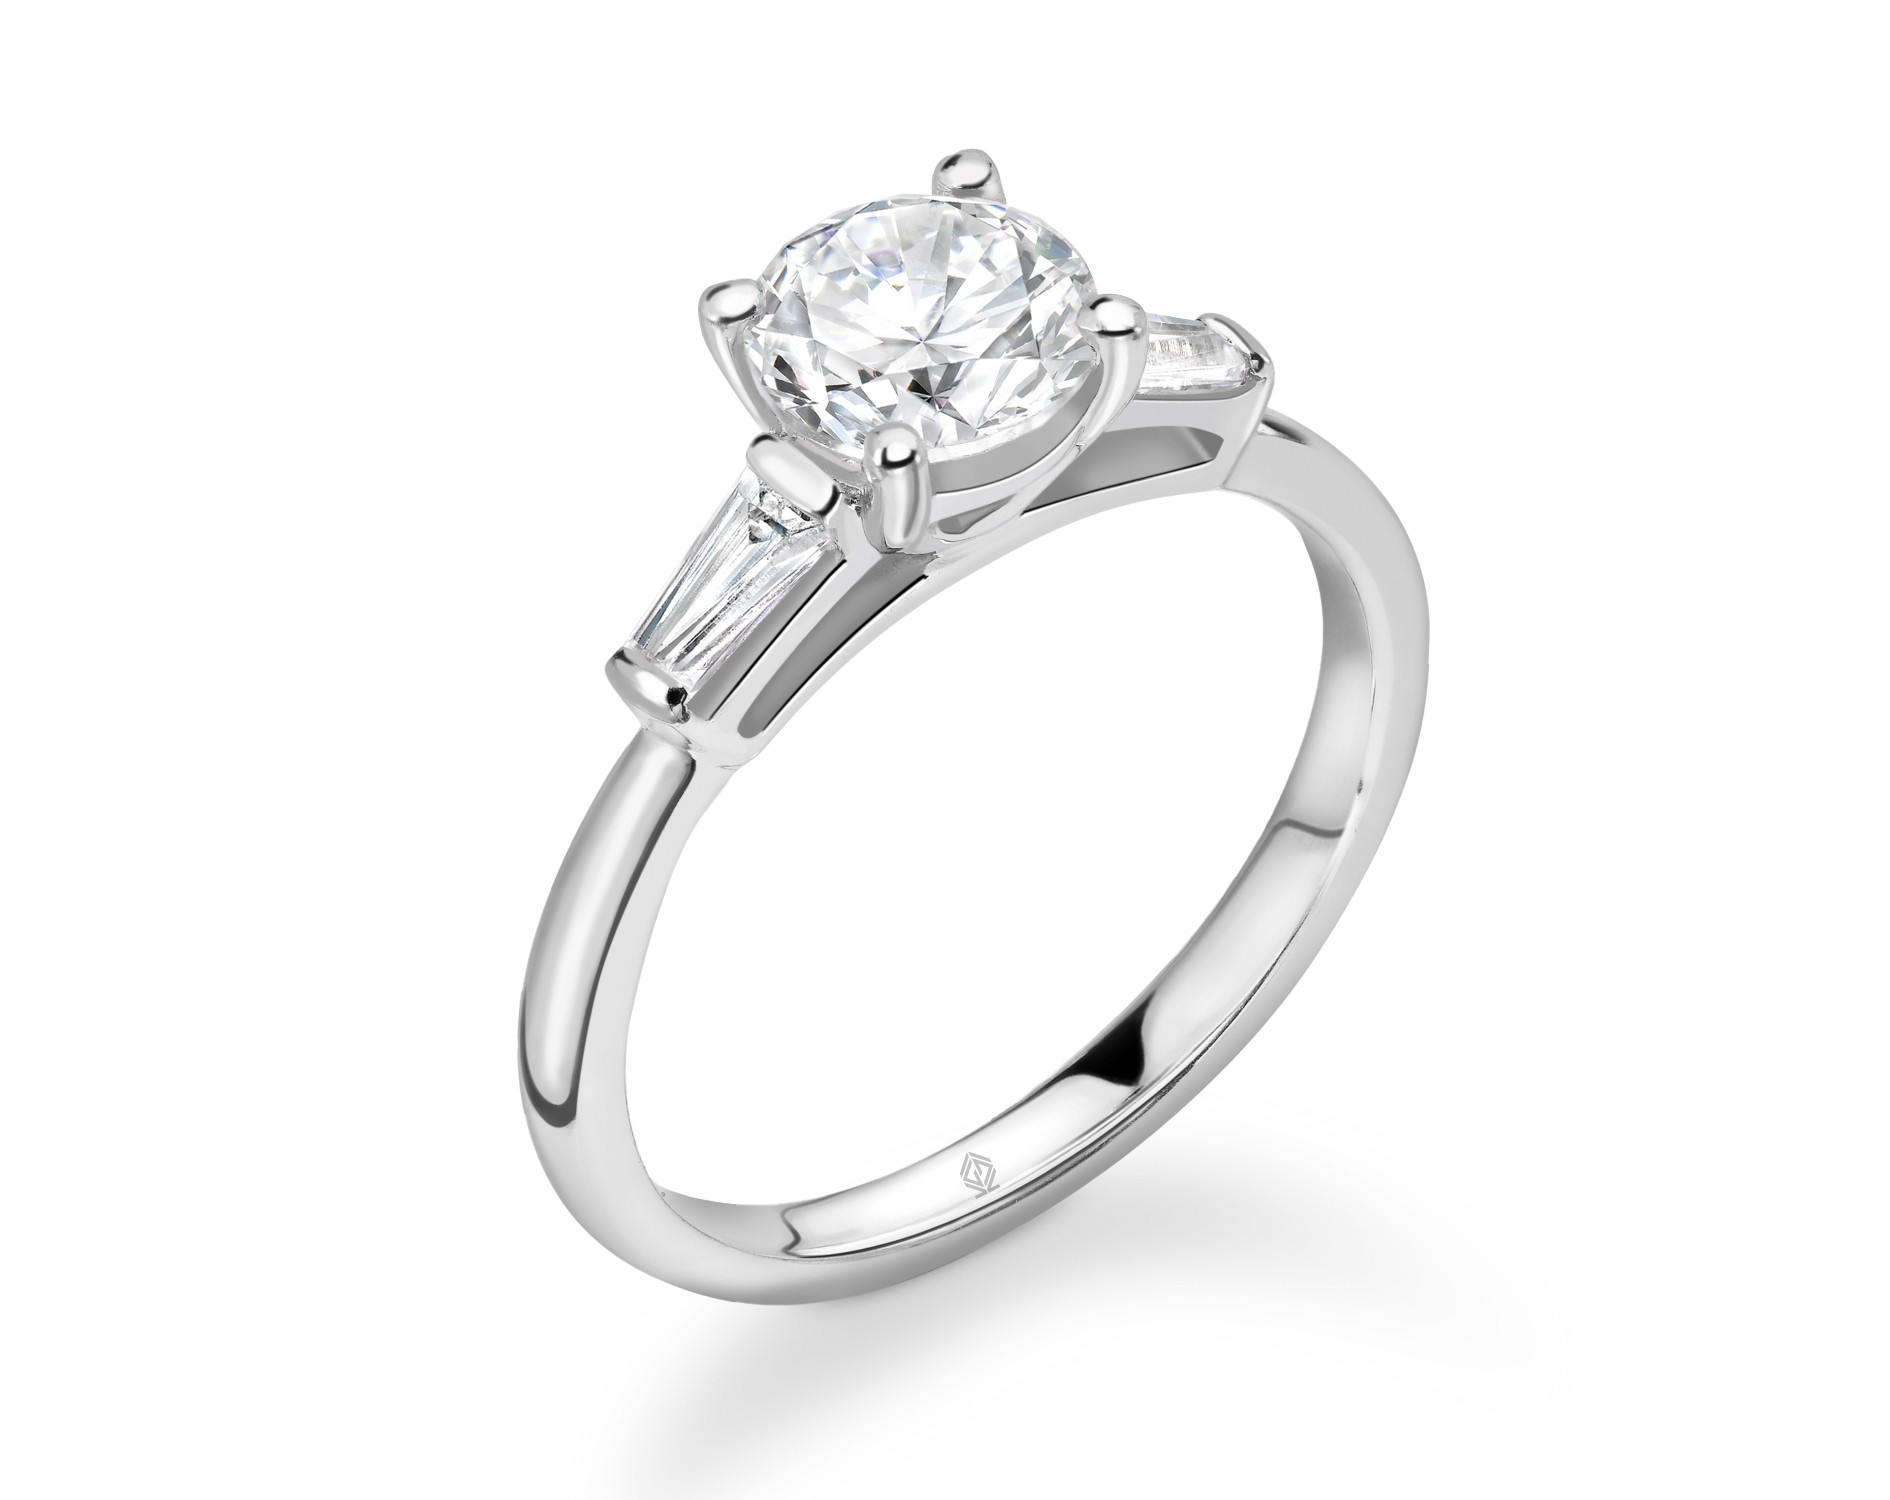 18K WHITE GOLD ROUND CUT DIAMOND RING WITH BAGUETTES CUT SIDE STONES